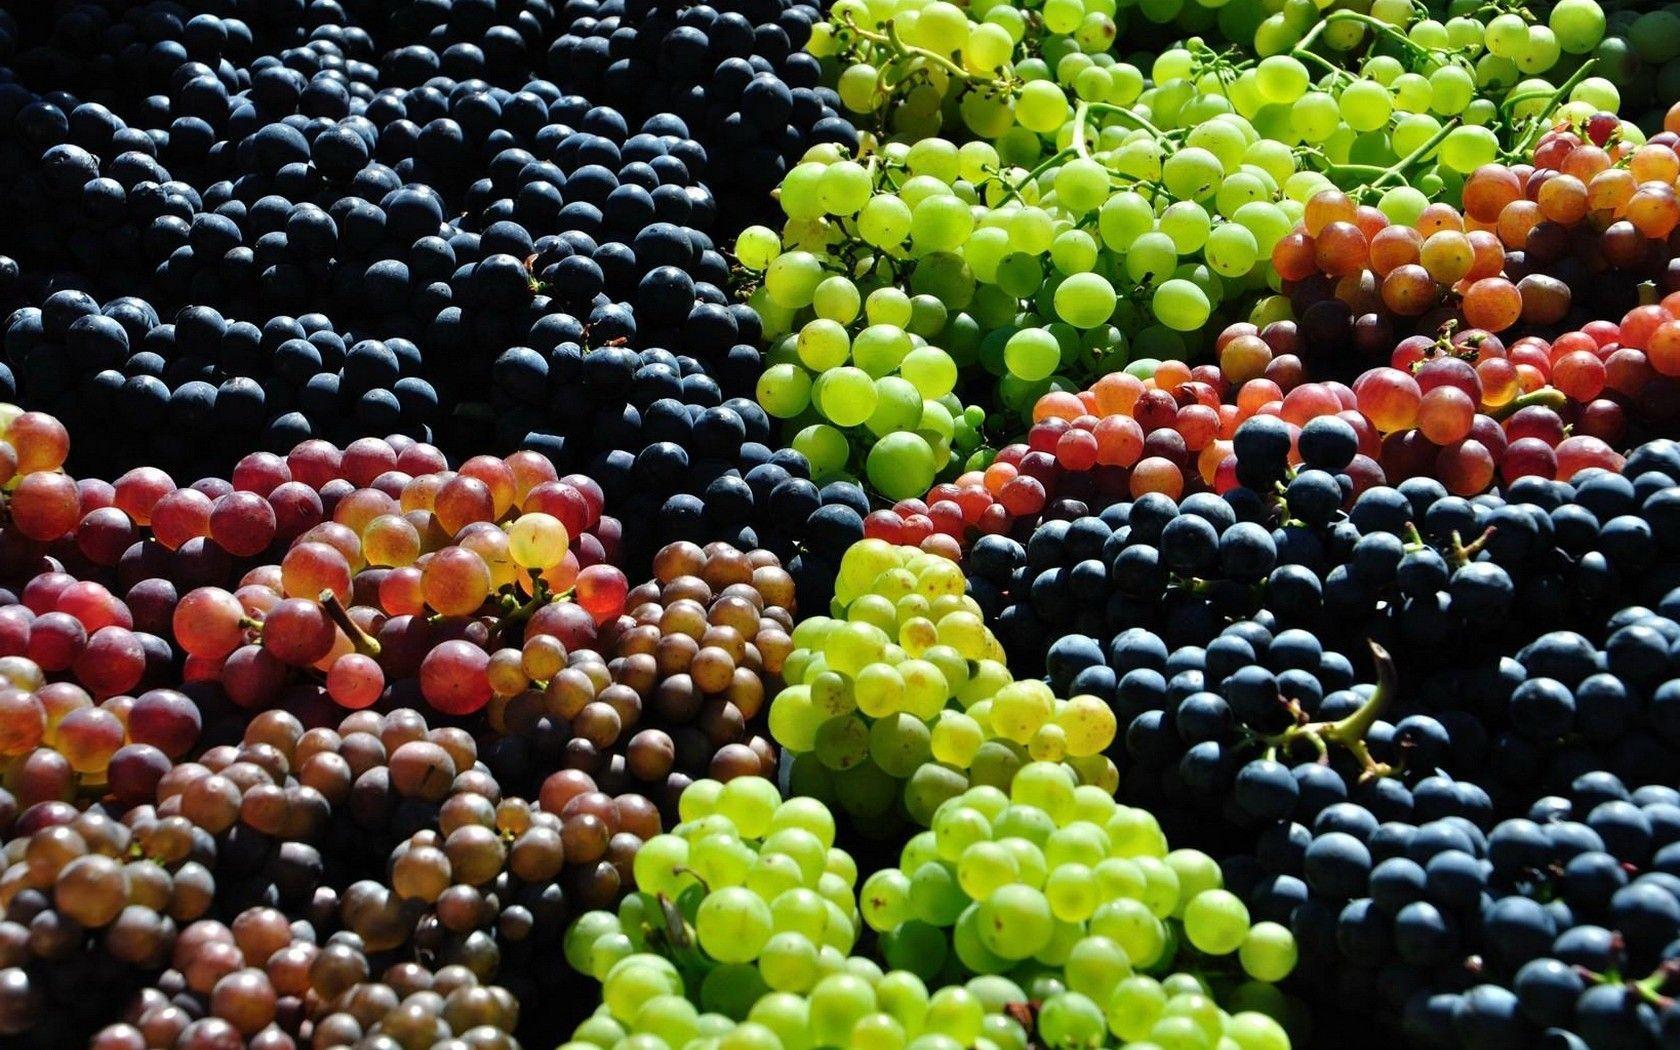 Awesome Pics. Grapes Widescreen Wallpaper